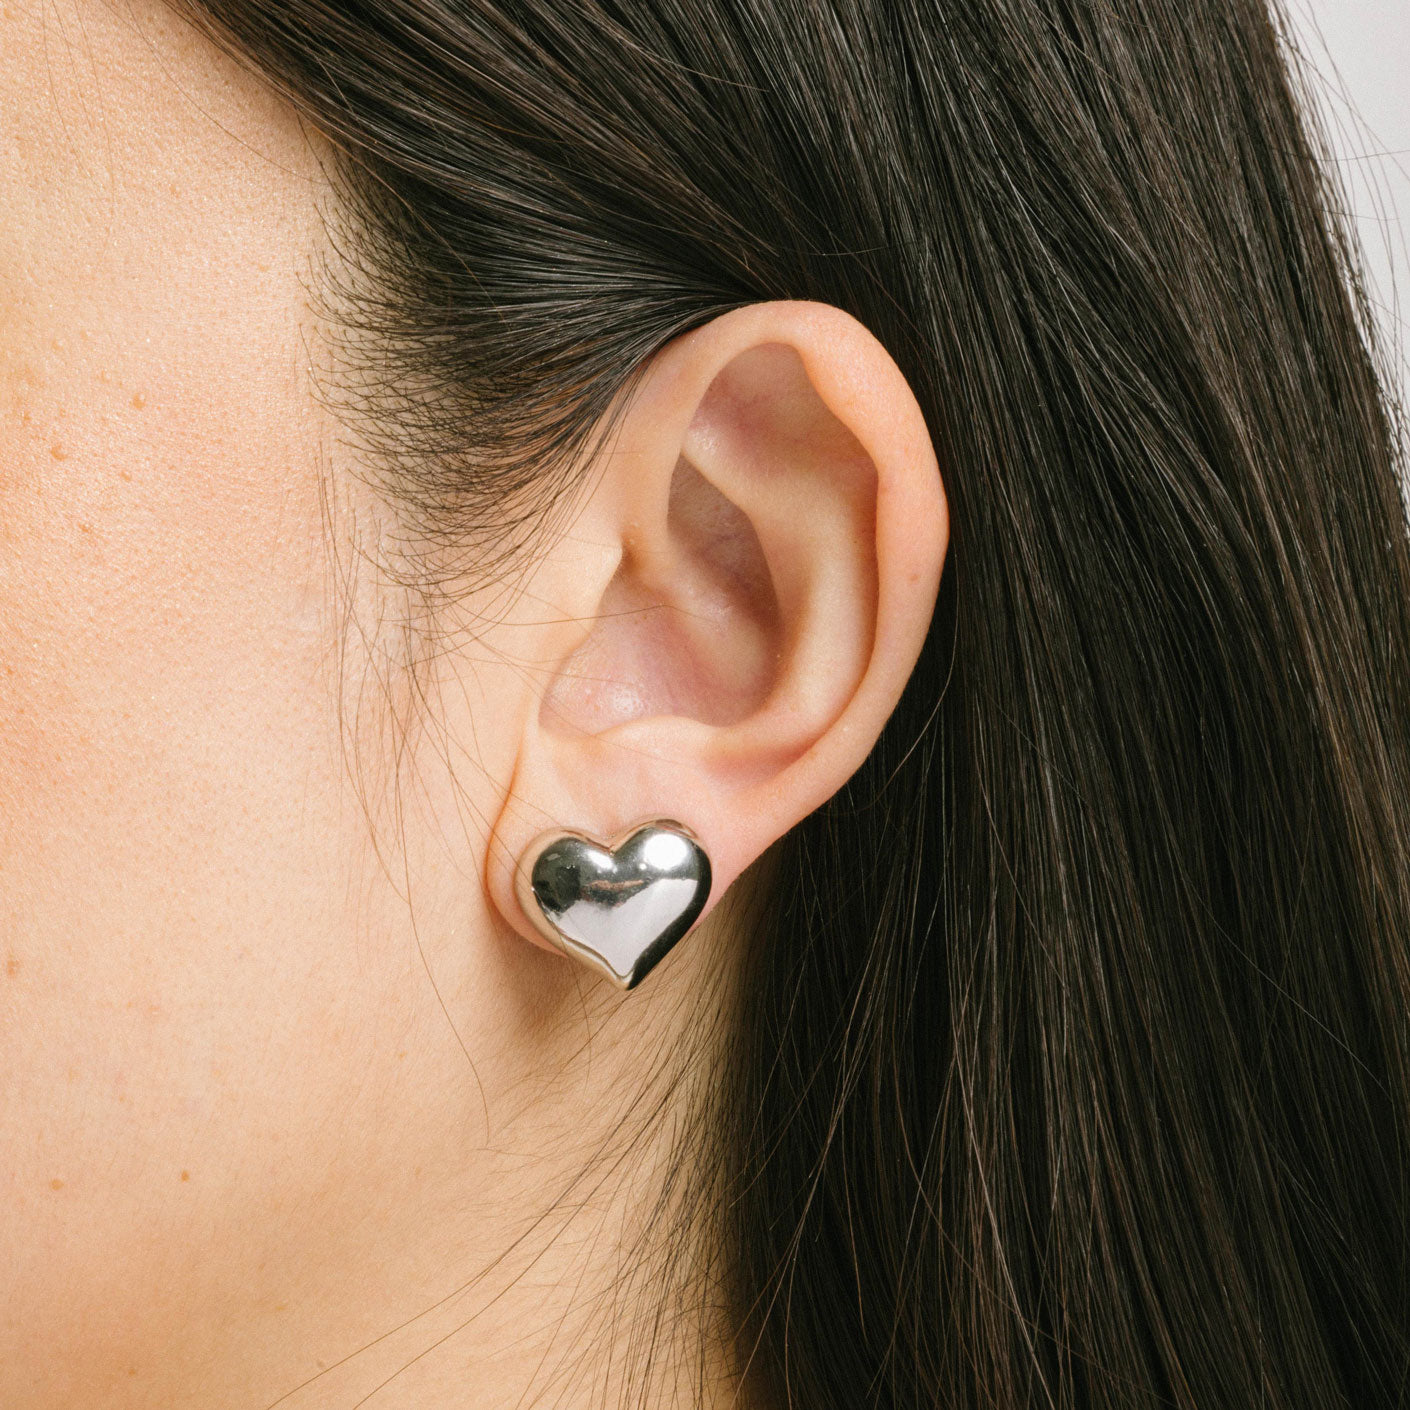 A model wearing the Coeur Clip On Earrings in Silver offer a medium-strength, adjustable hold via a mosquito coil clip. Ideal for all ear types, these earrings provide a secure yet comfortable fit for up to 24 hours. Crafted with Zinc Alloy and Copper, each purchase contains a single pair.